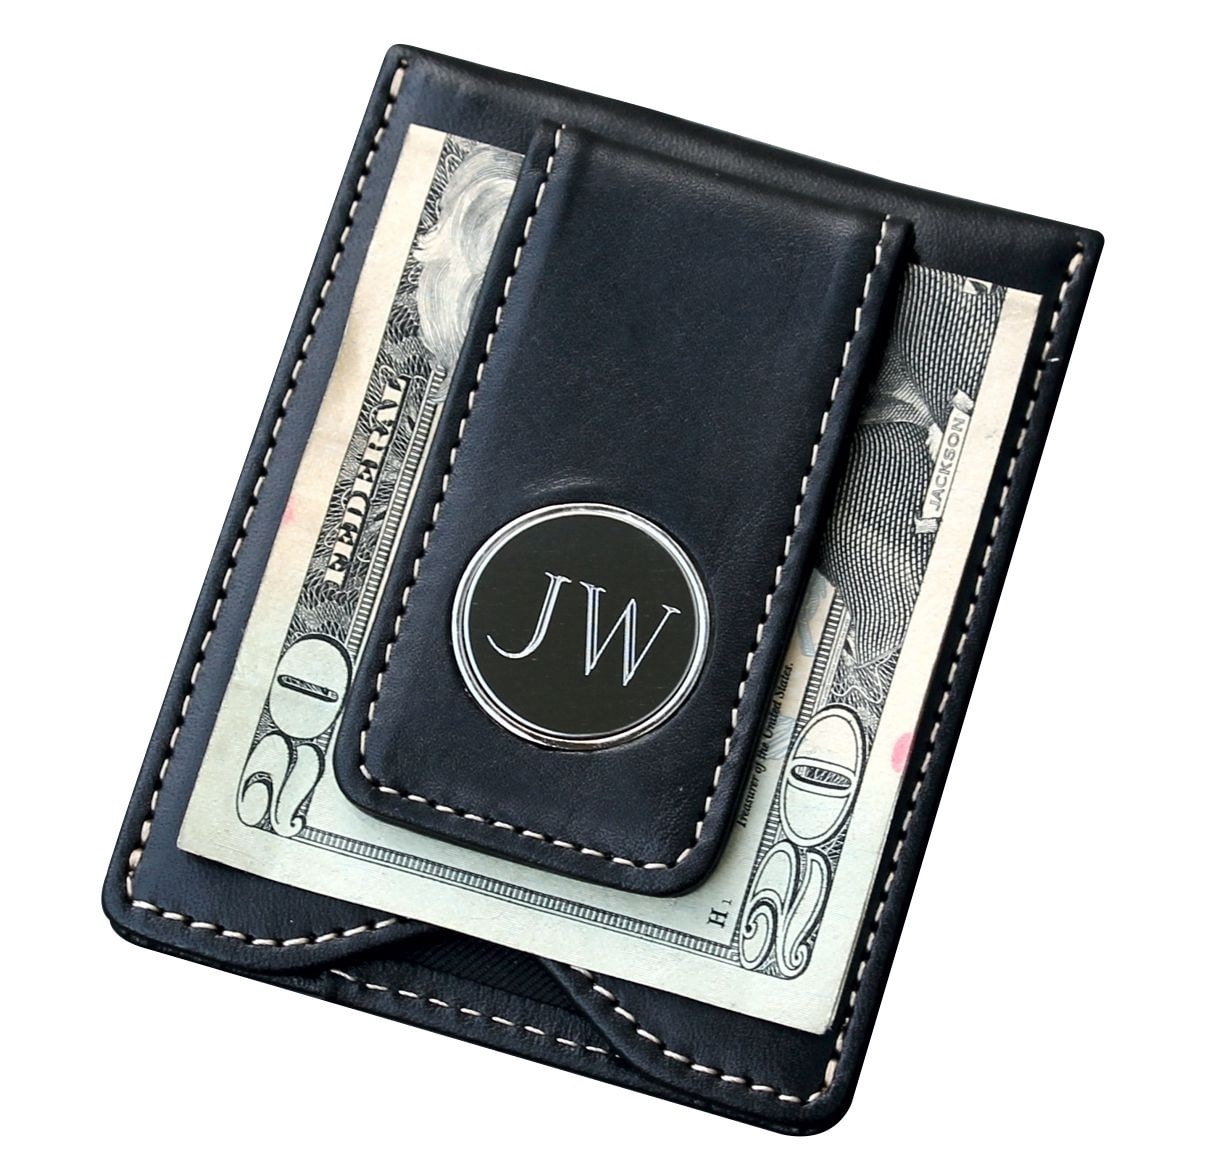 personalized leather money clip wallet